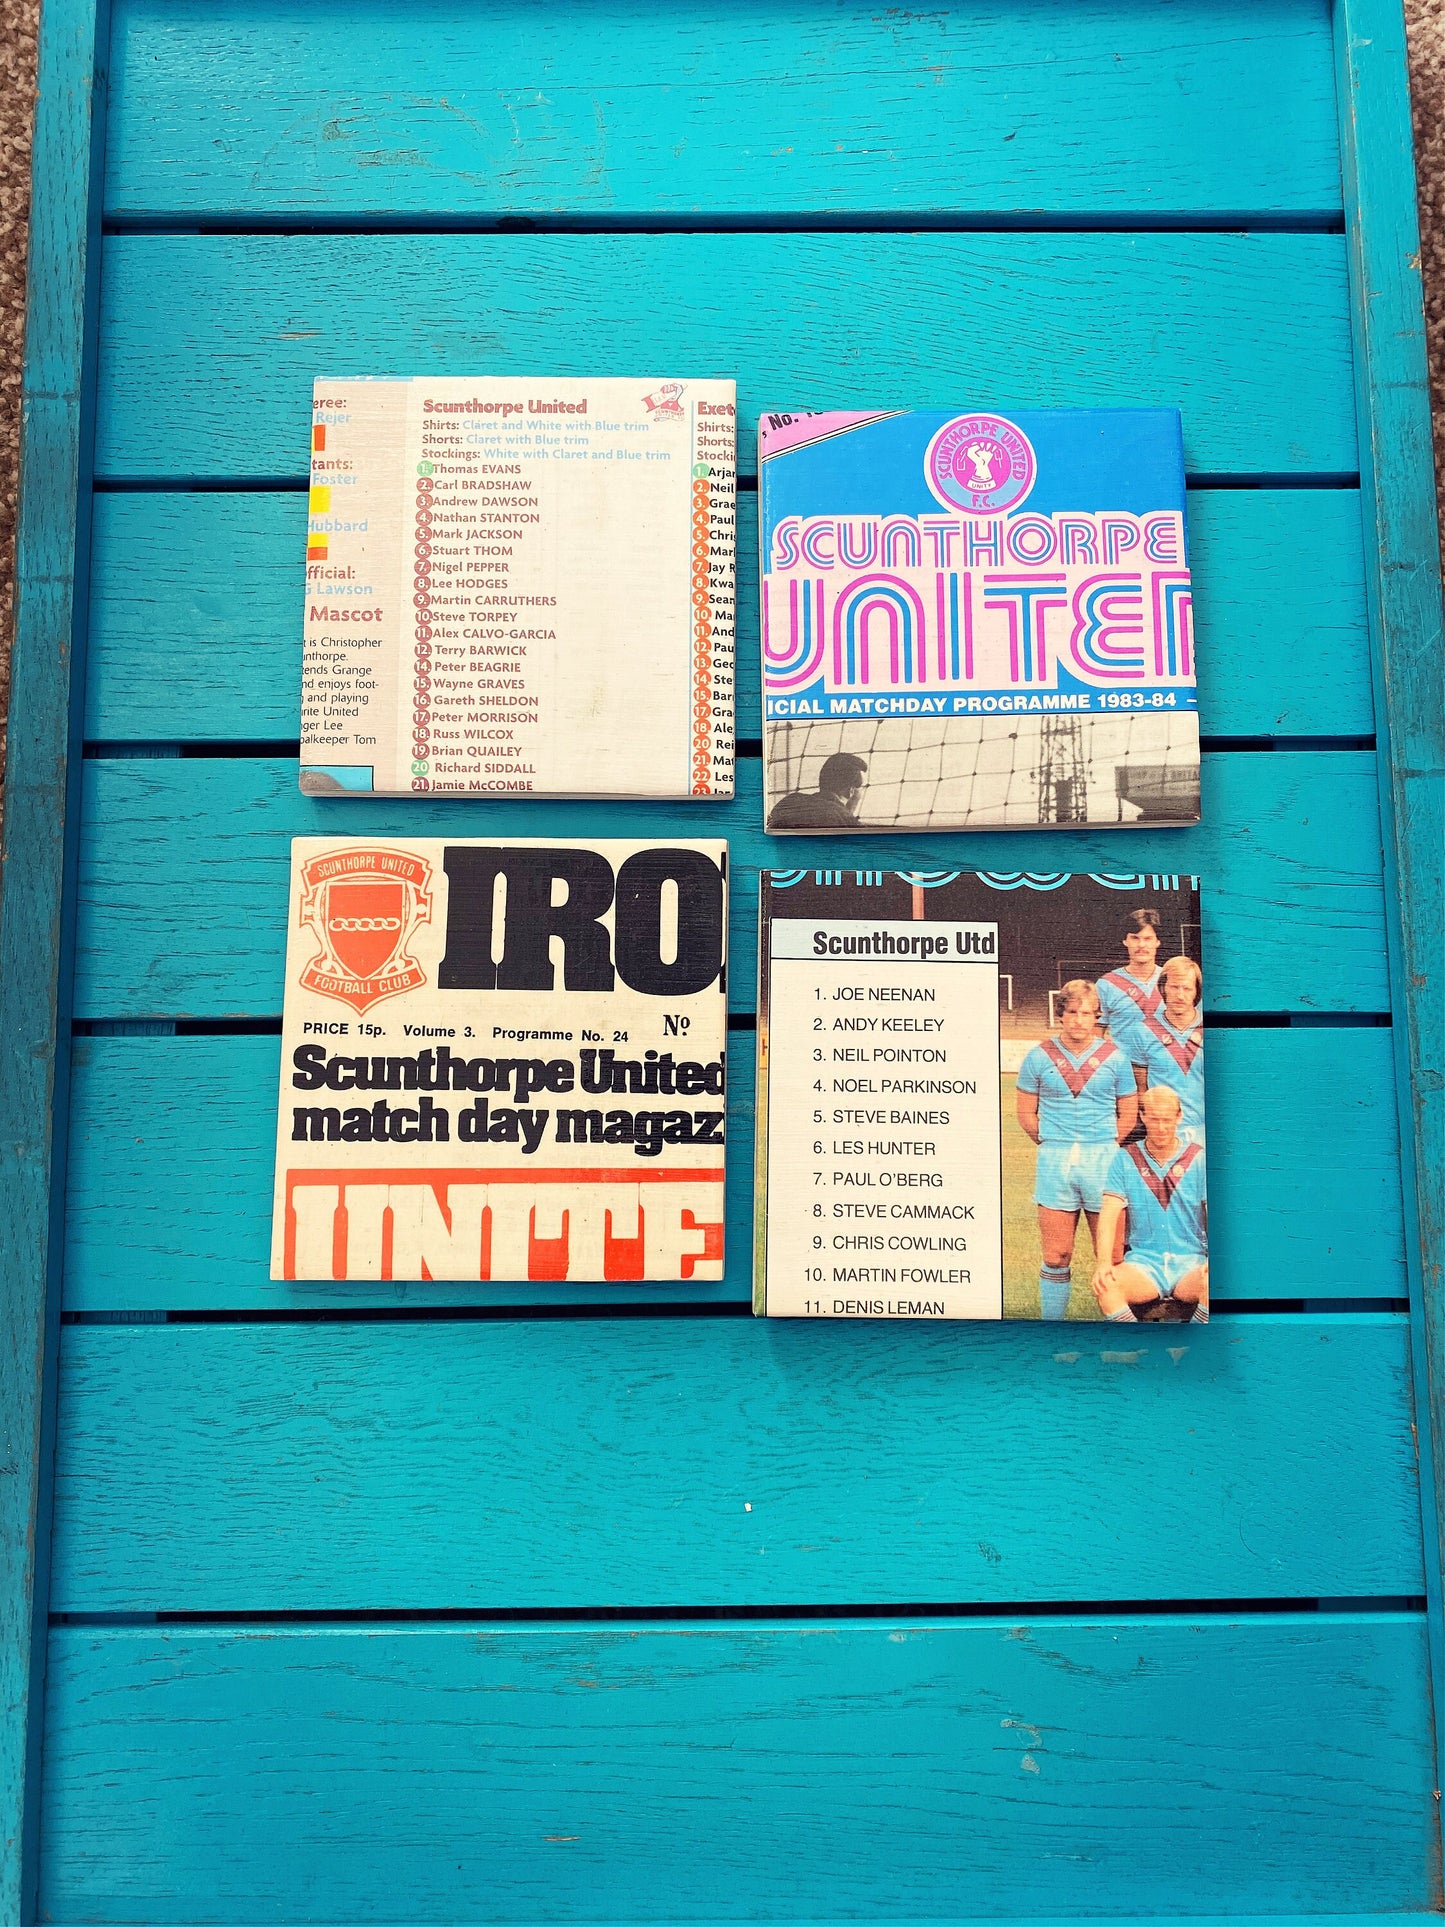 Vintage Scunthorpe United Football Programme Coasters. Upcycled Football Gift. Man Cave Home Decor. Retro Football Gift for Dad.